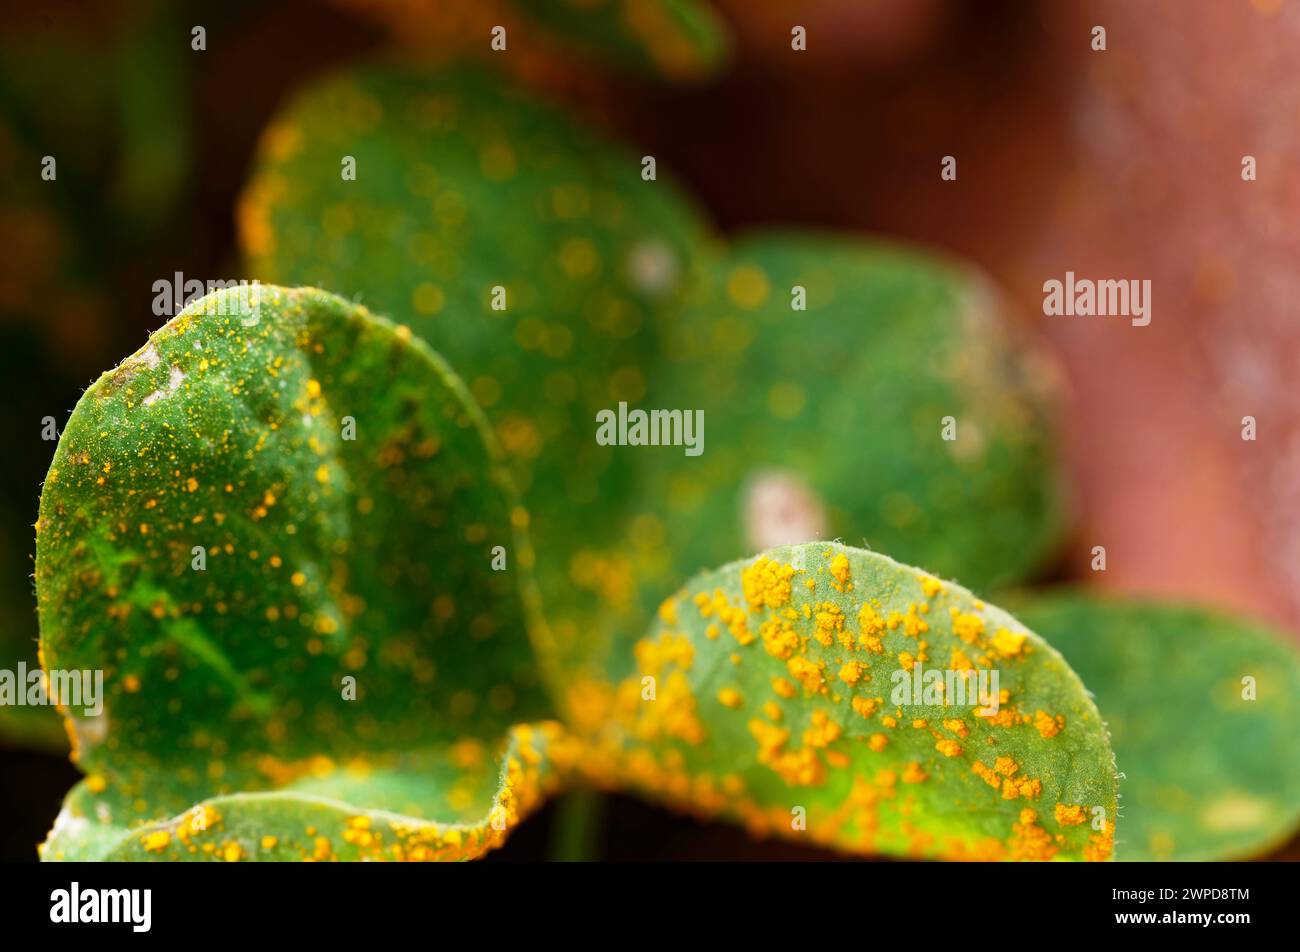 Oxalis rust affects the leaves of an oxalis plant, marking it with yellow spots Stock Photo